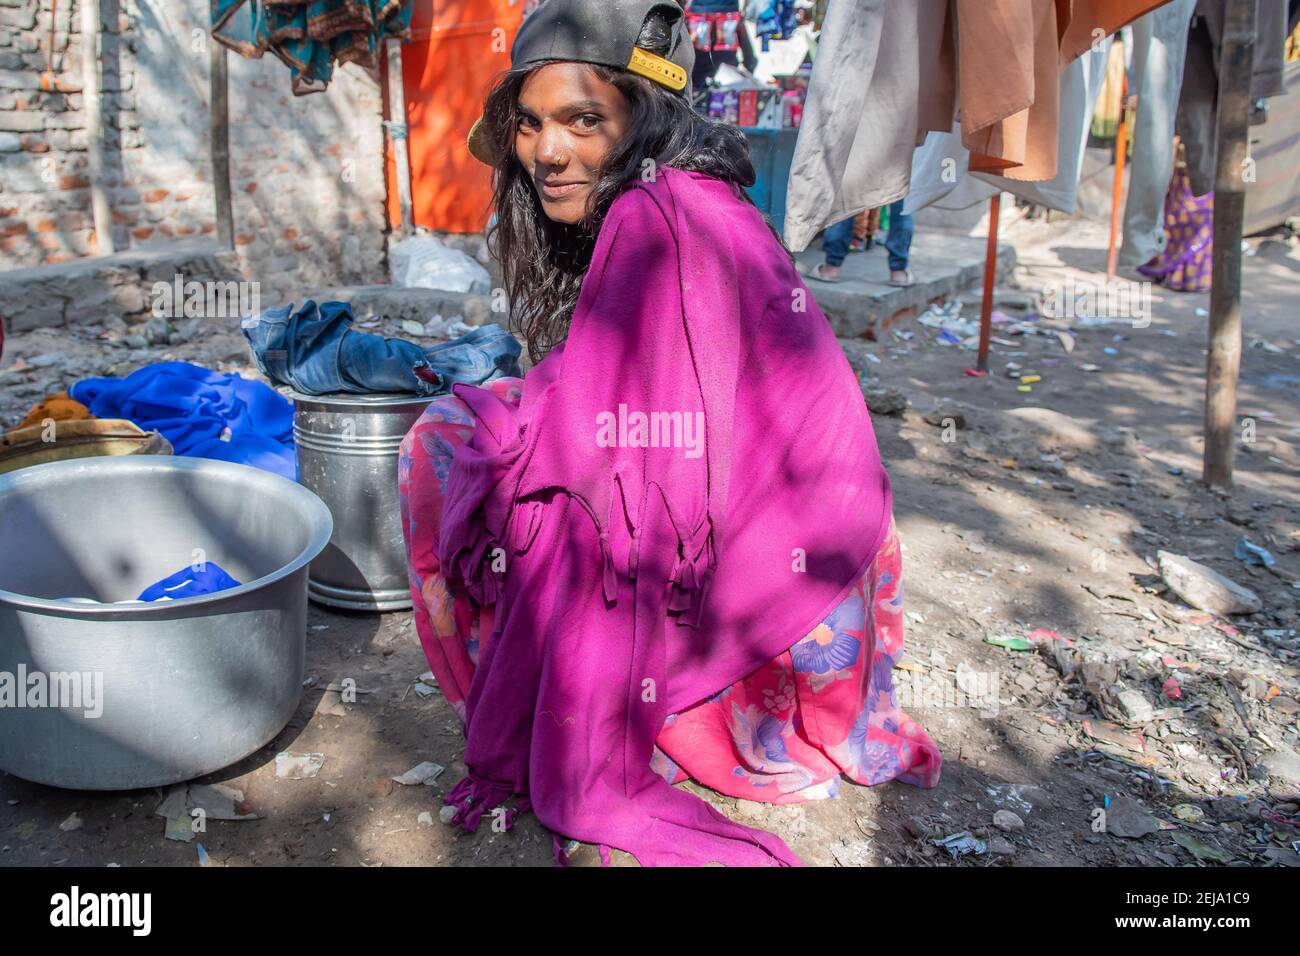 Rajasthan. India. 07-02-2018. Young woman preparing lunch at their rural community. Female adolescent need to work to raise income for family. Stock Photo